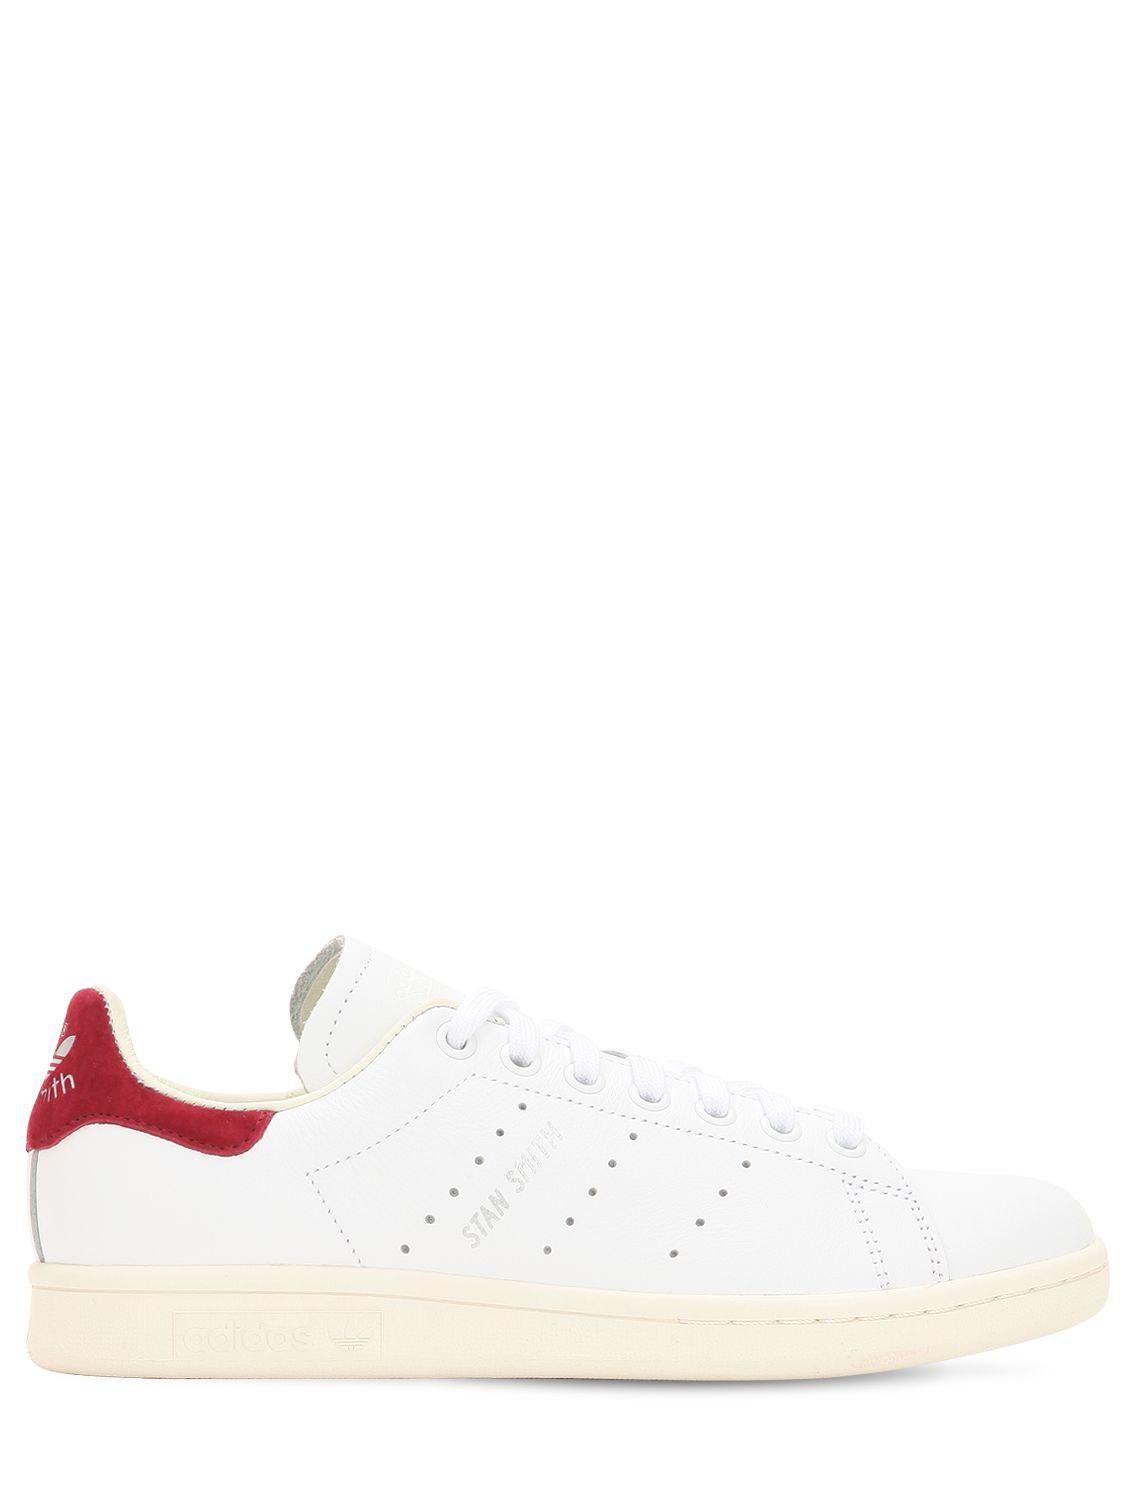 adidas Originals Stan Smith Leather Sneakers in White/Bordeaux (White) -  Lyst